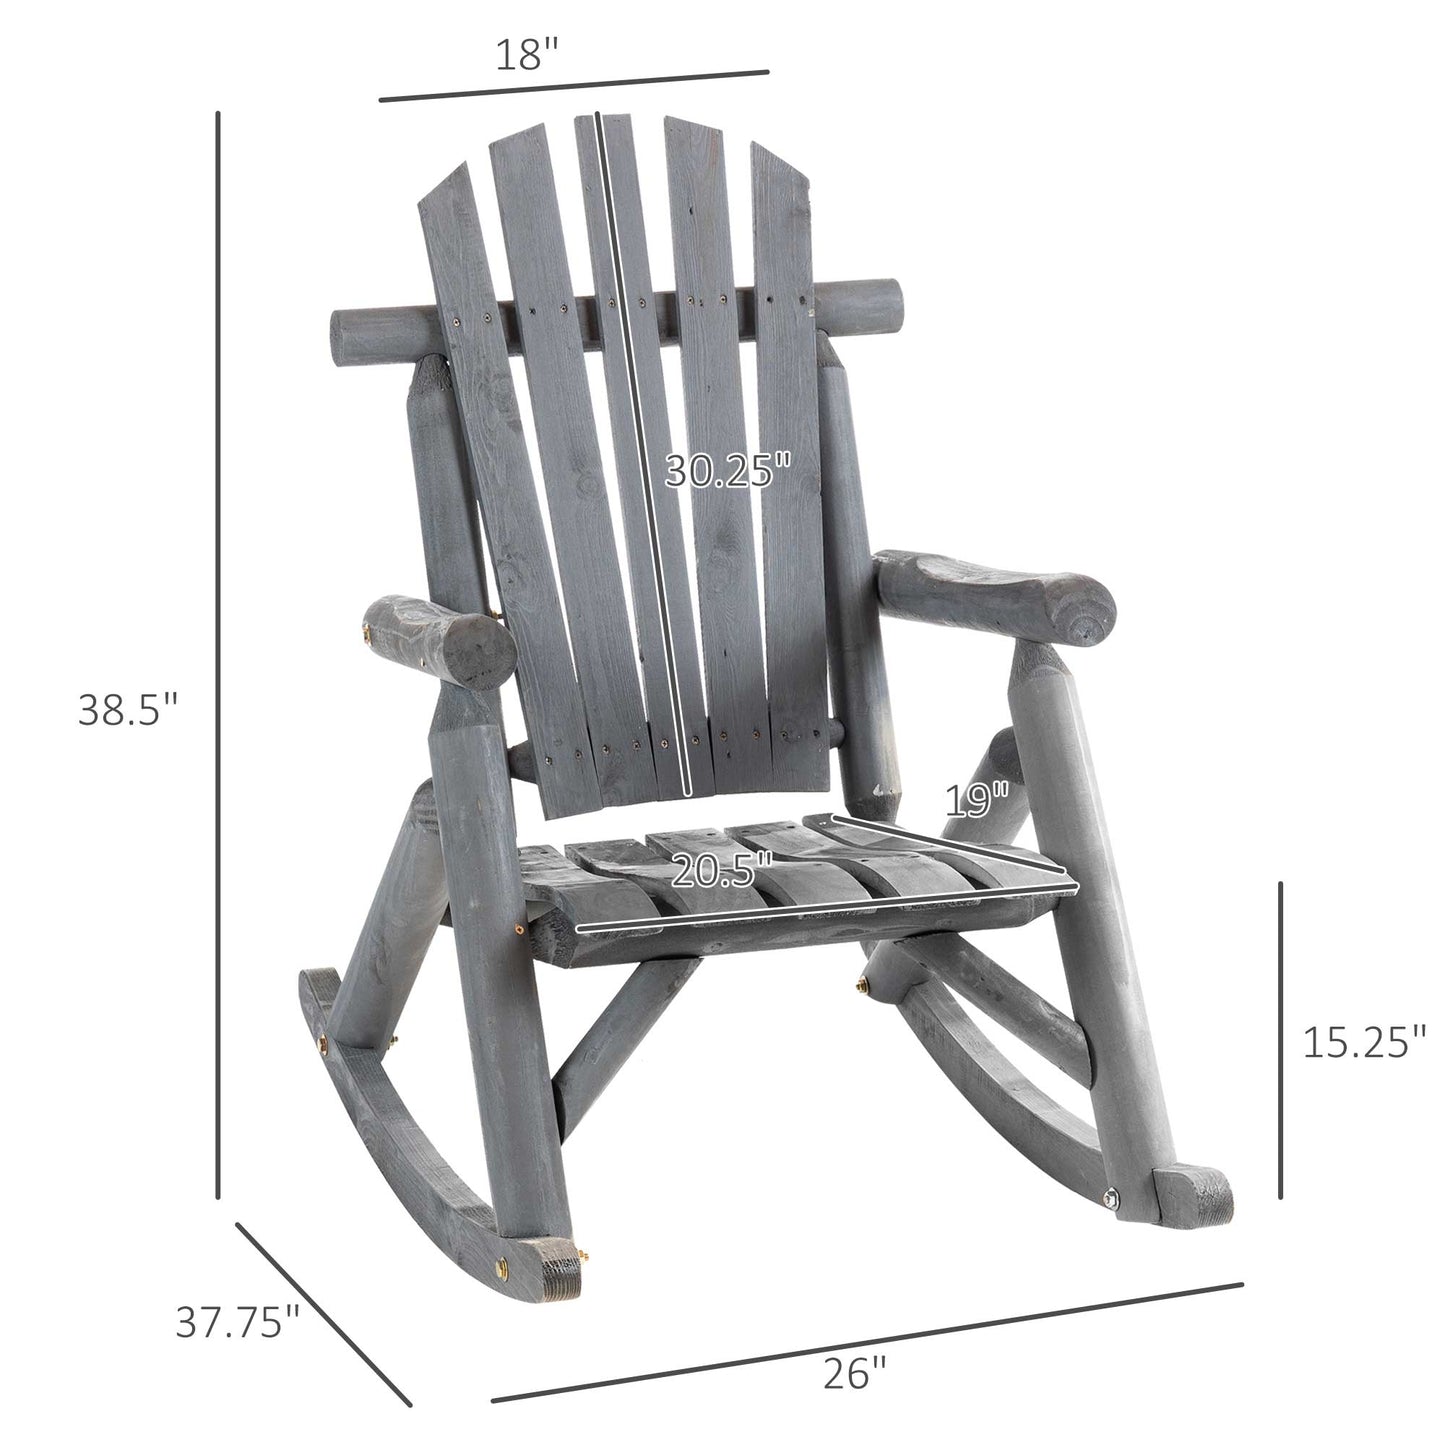 Outdoor and Garden-Wooden Adirondack Rocking Chair, Outdoor Rustic Log Rocker with Slatted Design for Patio, Dark Grey - Outdoor Style Company